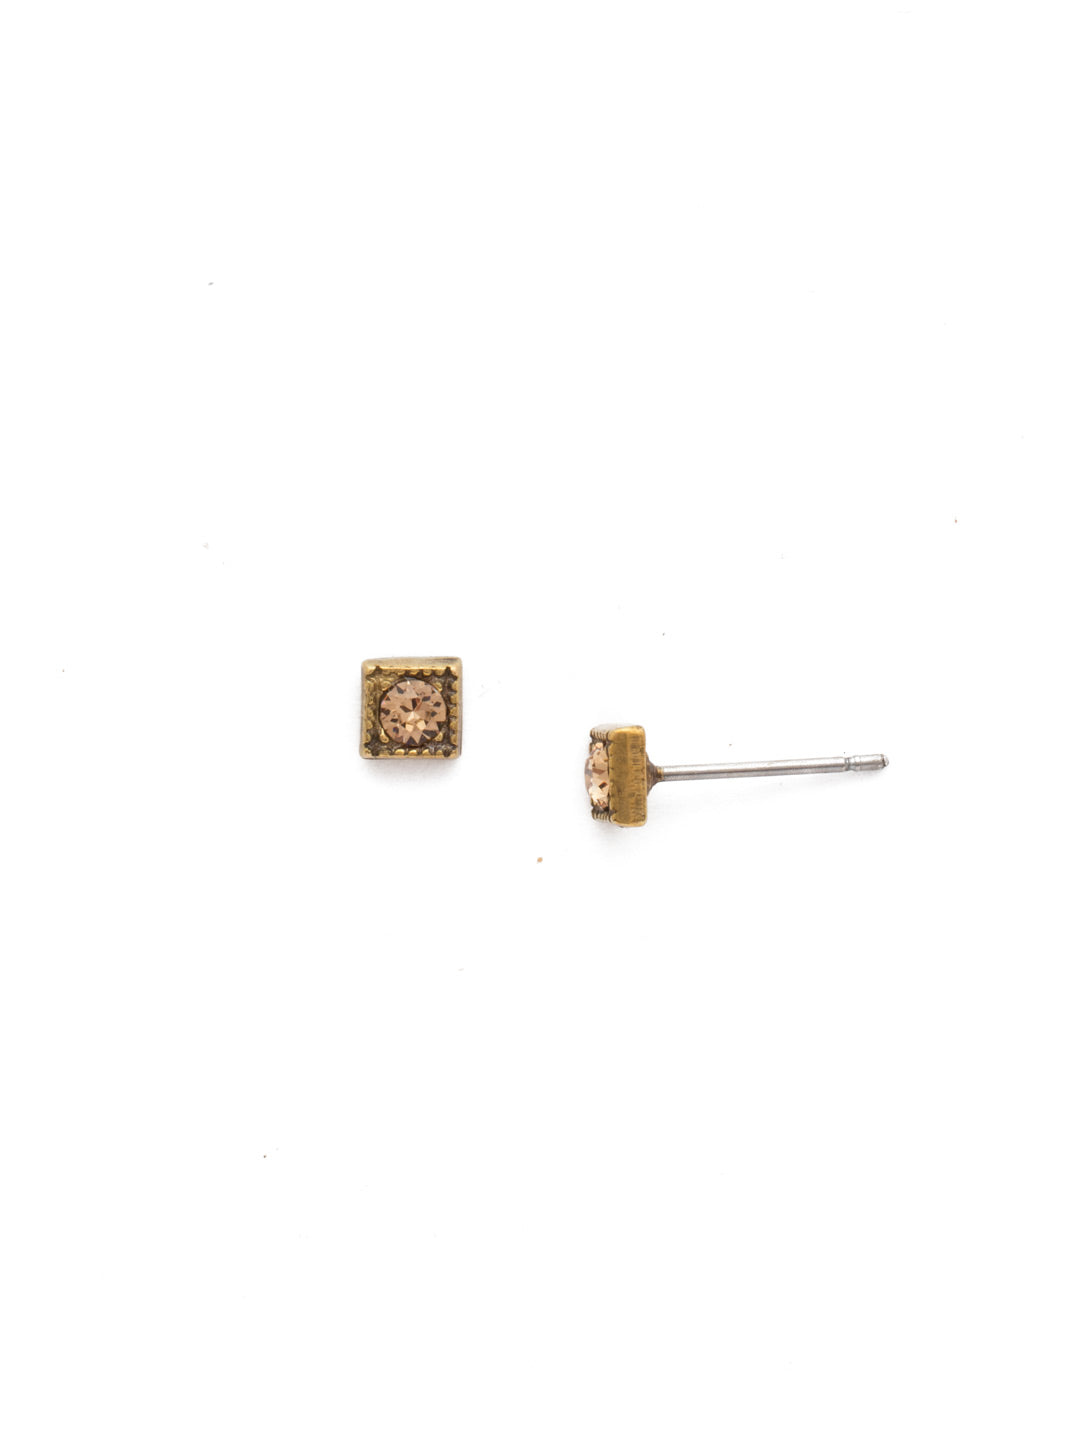 Rosa Stud Earrings - EEJ11AGLC - A classic Sorrelli style to make a statement or wear everyday. From Sorrelli's Light Colorado collection in our Antique Gold-tone finish.